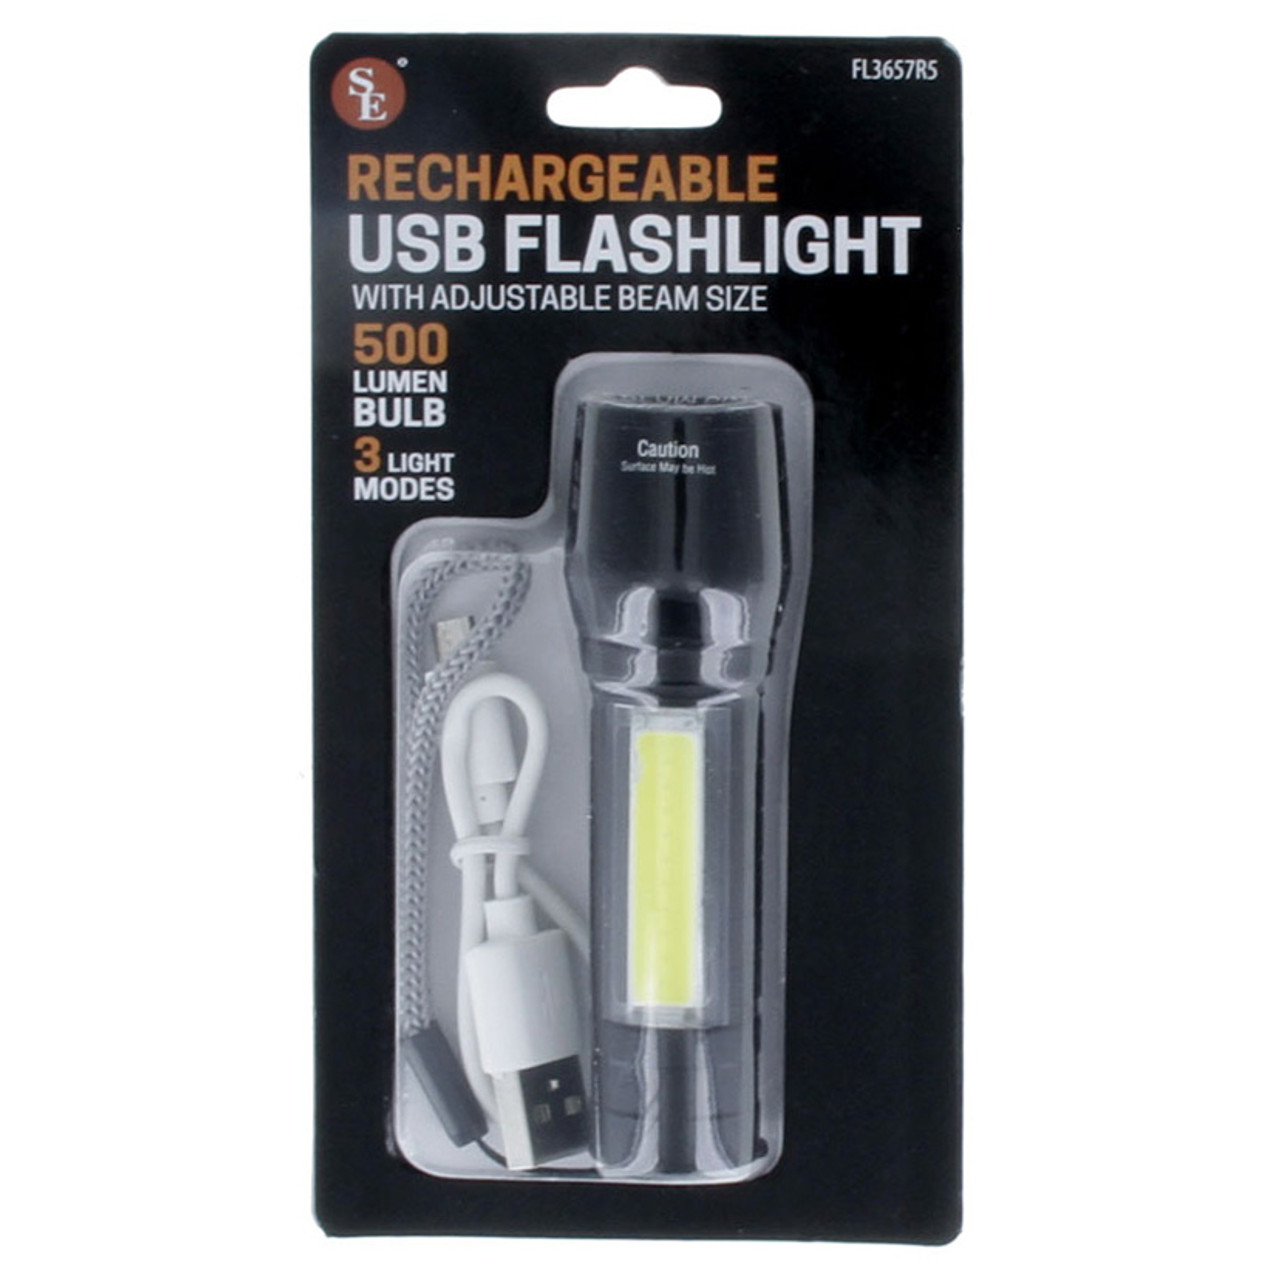 https://cdn11.bigcommerce.com/s-tumf4kk1l4/images/stencil/1280x1280/products/4014/7387/rechargeable-flashlight-usb-cable-included-500-lumen-adjustable-beam-side-light-7__78973.1697230826.jpg?c=1?imbypass=on